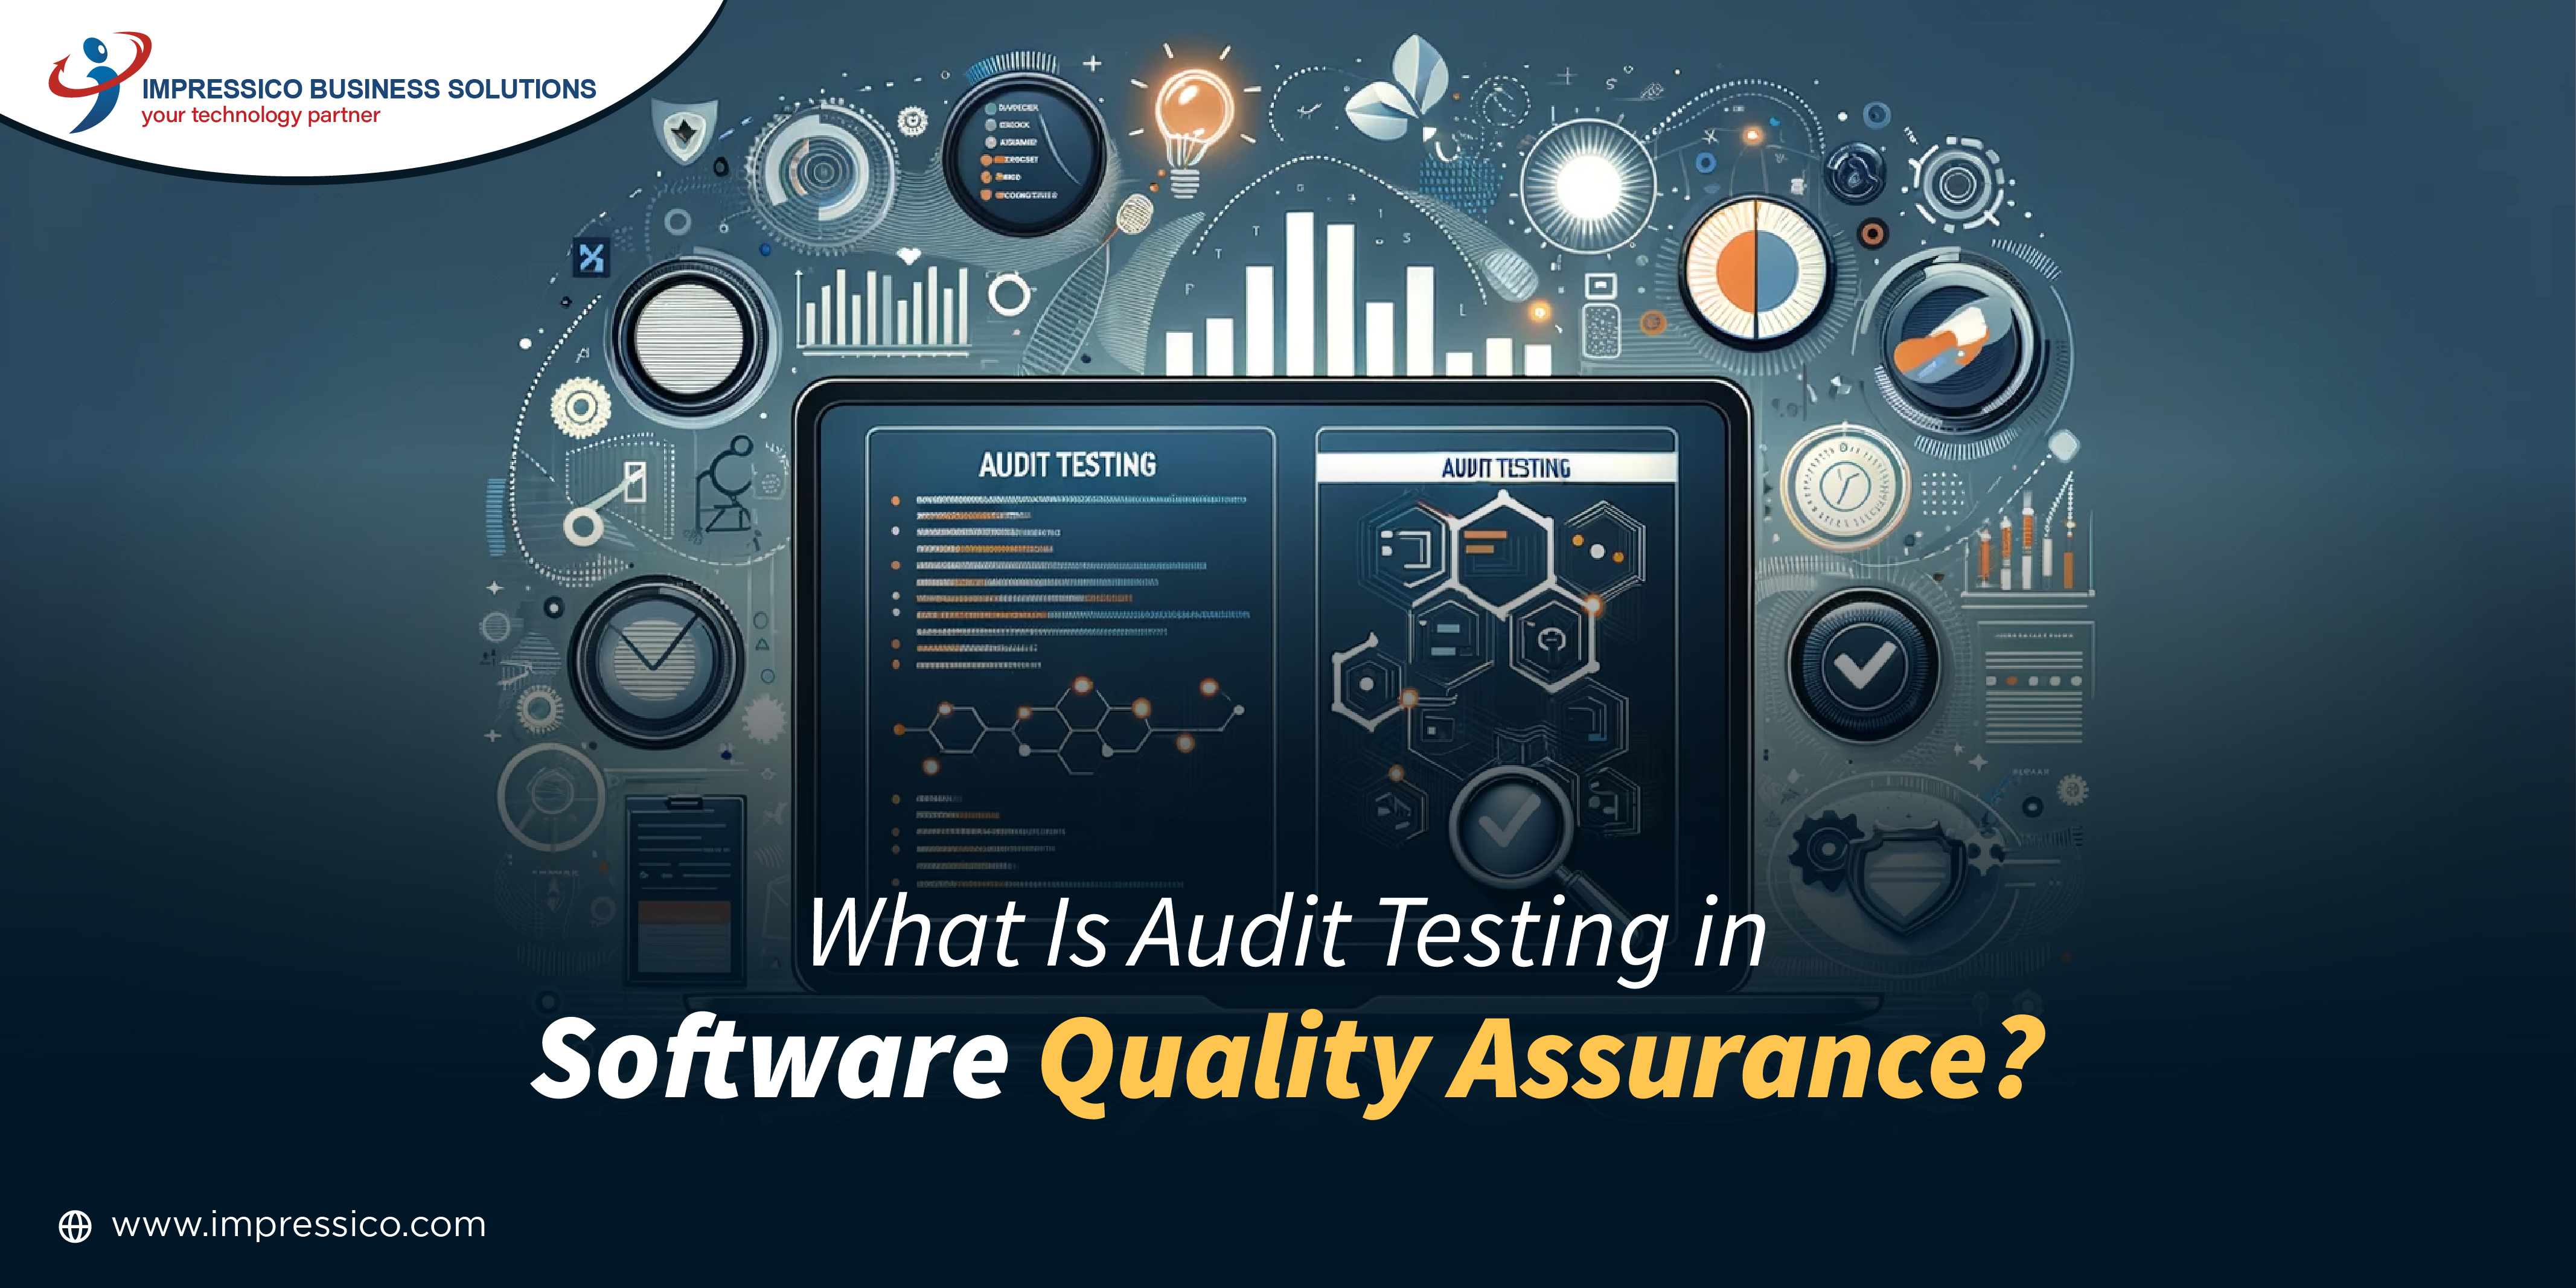 Audit Testing in Software Quality Assurance